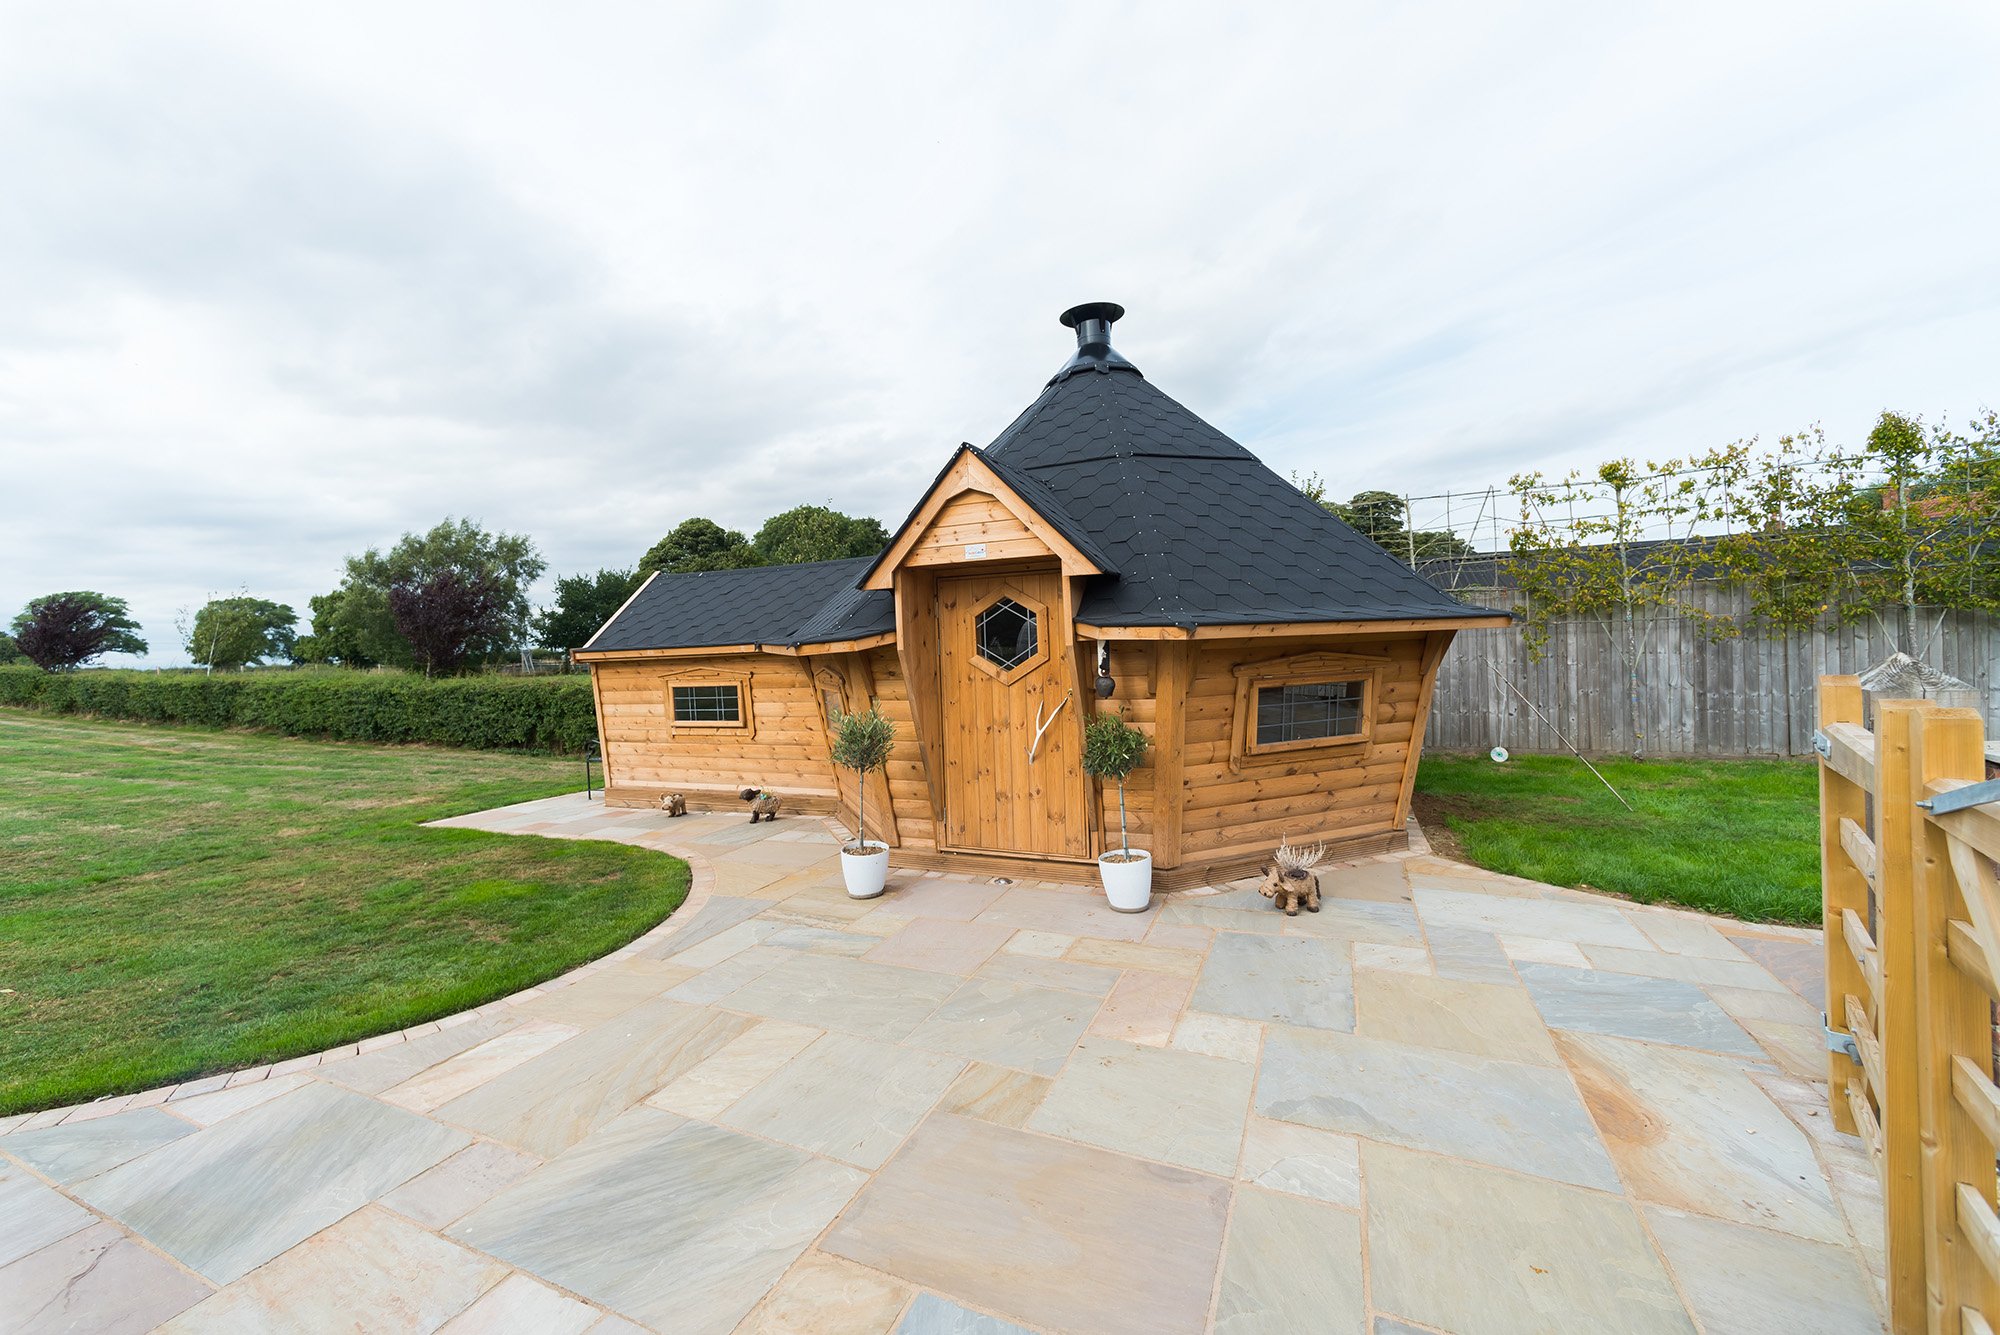 Exterior of Arctic Cabins Garden Bar within countryside setting